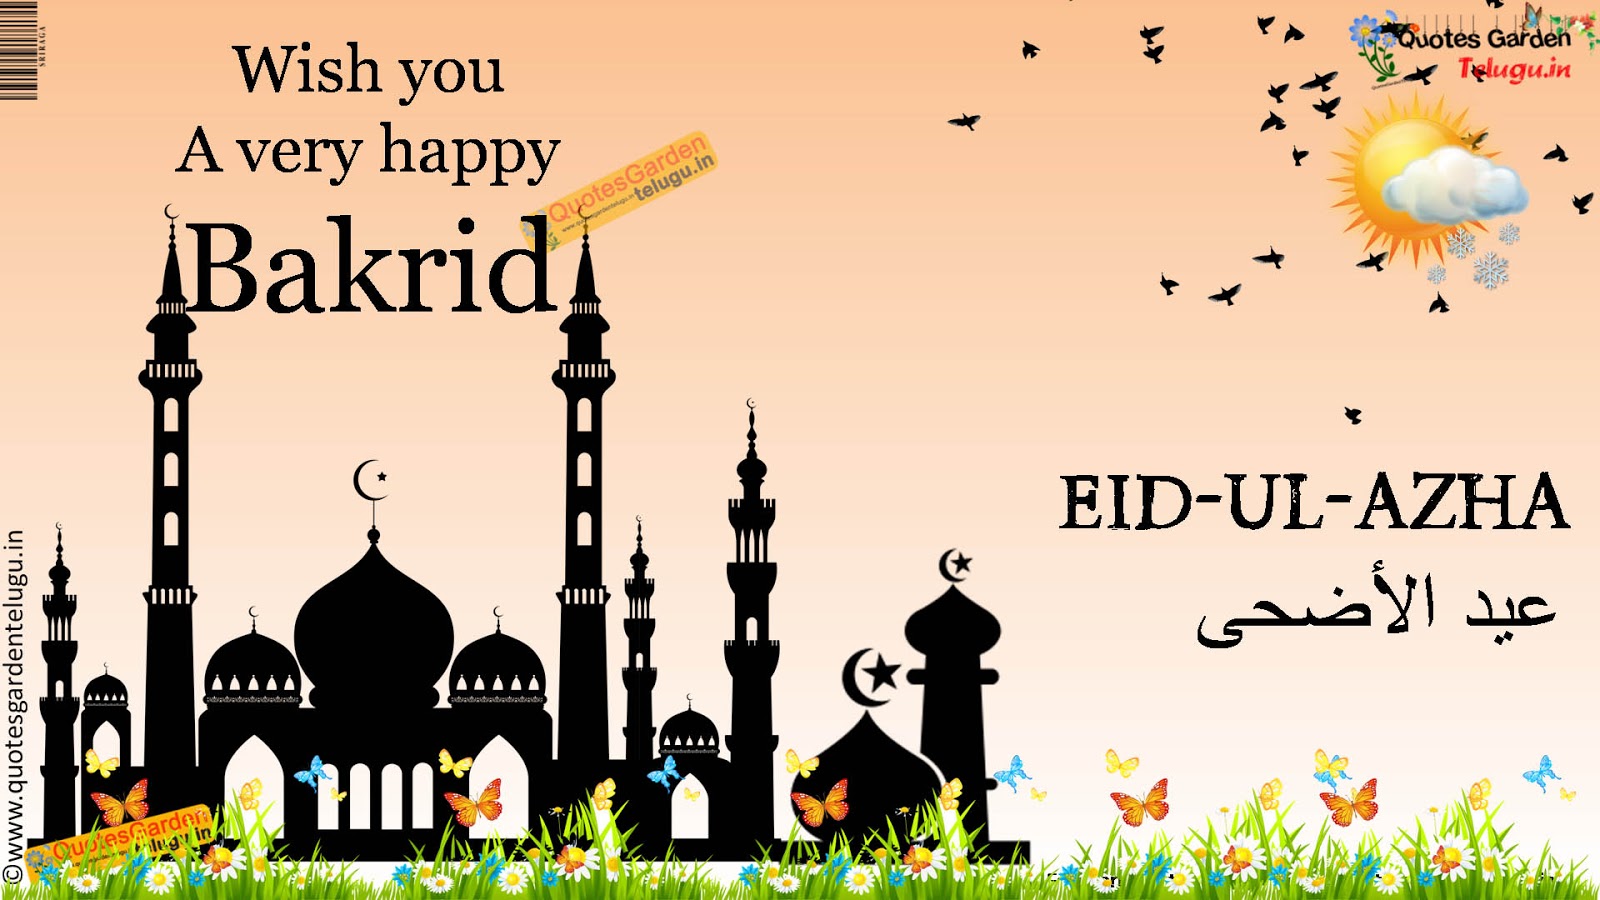 Happy Bakrid 2015 Quotes Greetings HDwallpapers 1139 | QUOTES ...